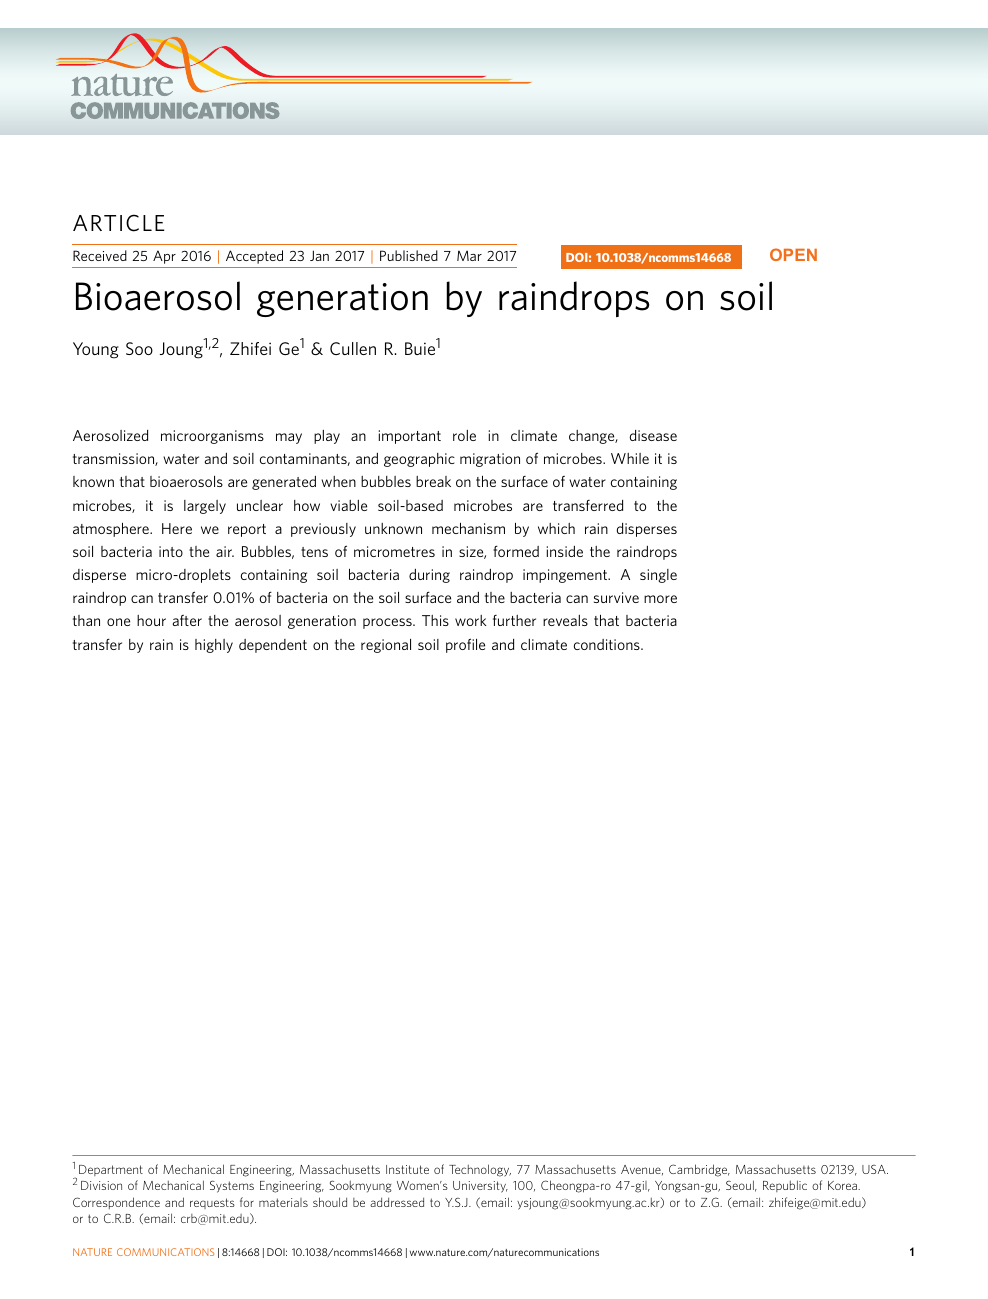 Bioaerosol Generation By Raindrops On Soil Topic Of Research Paper In Nano Technology Download Scholarly Article Pdf And Read For Free On Cyberleninka Open Science Hub